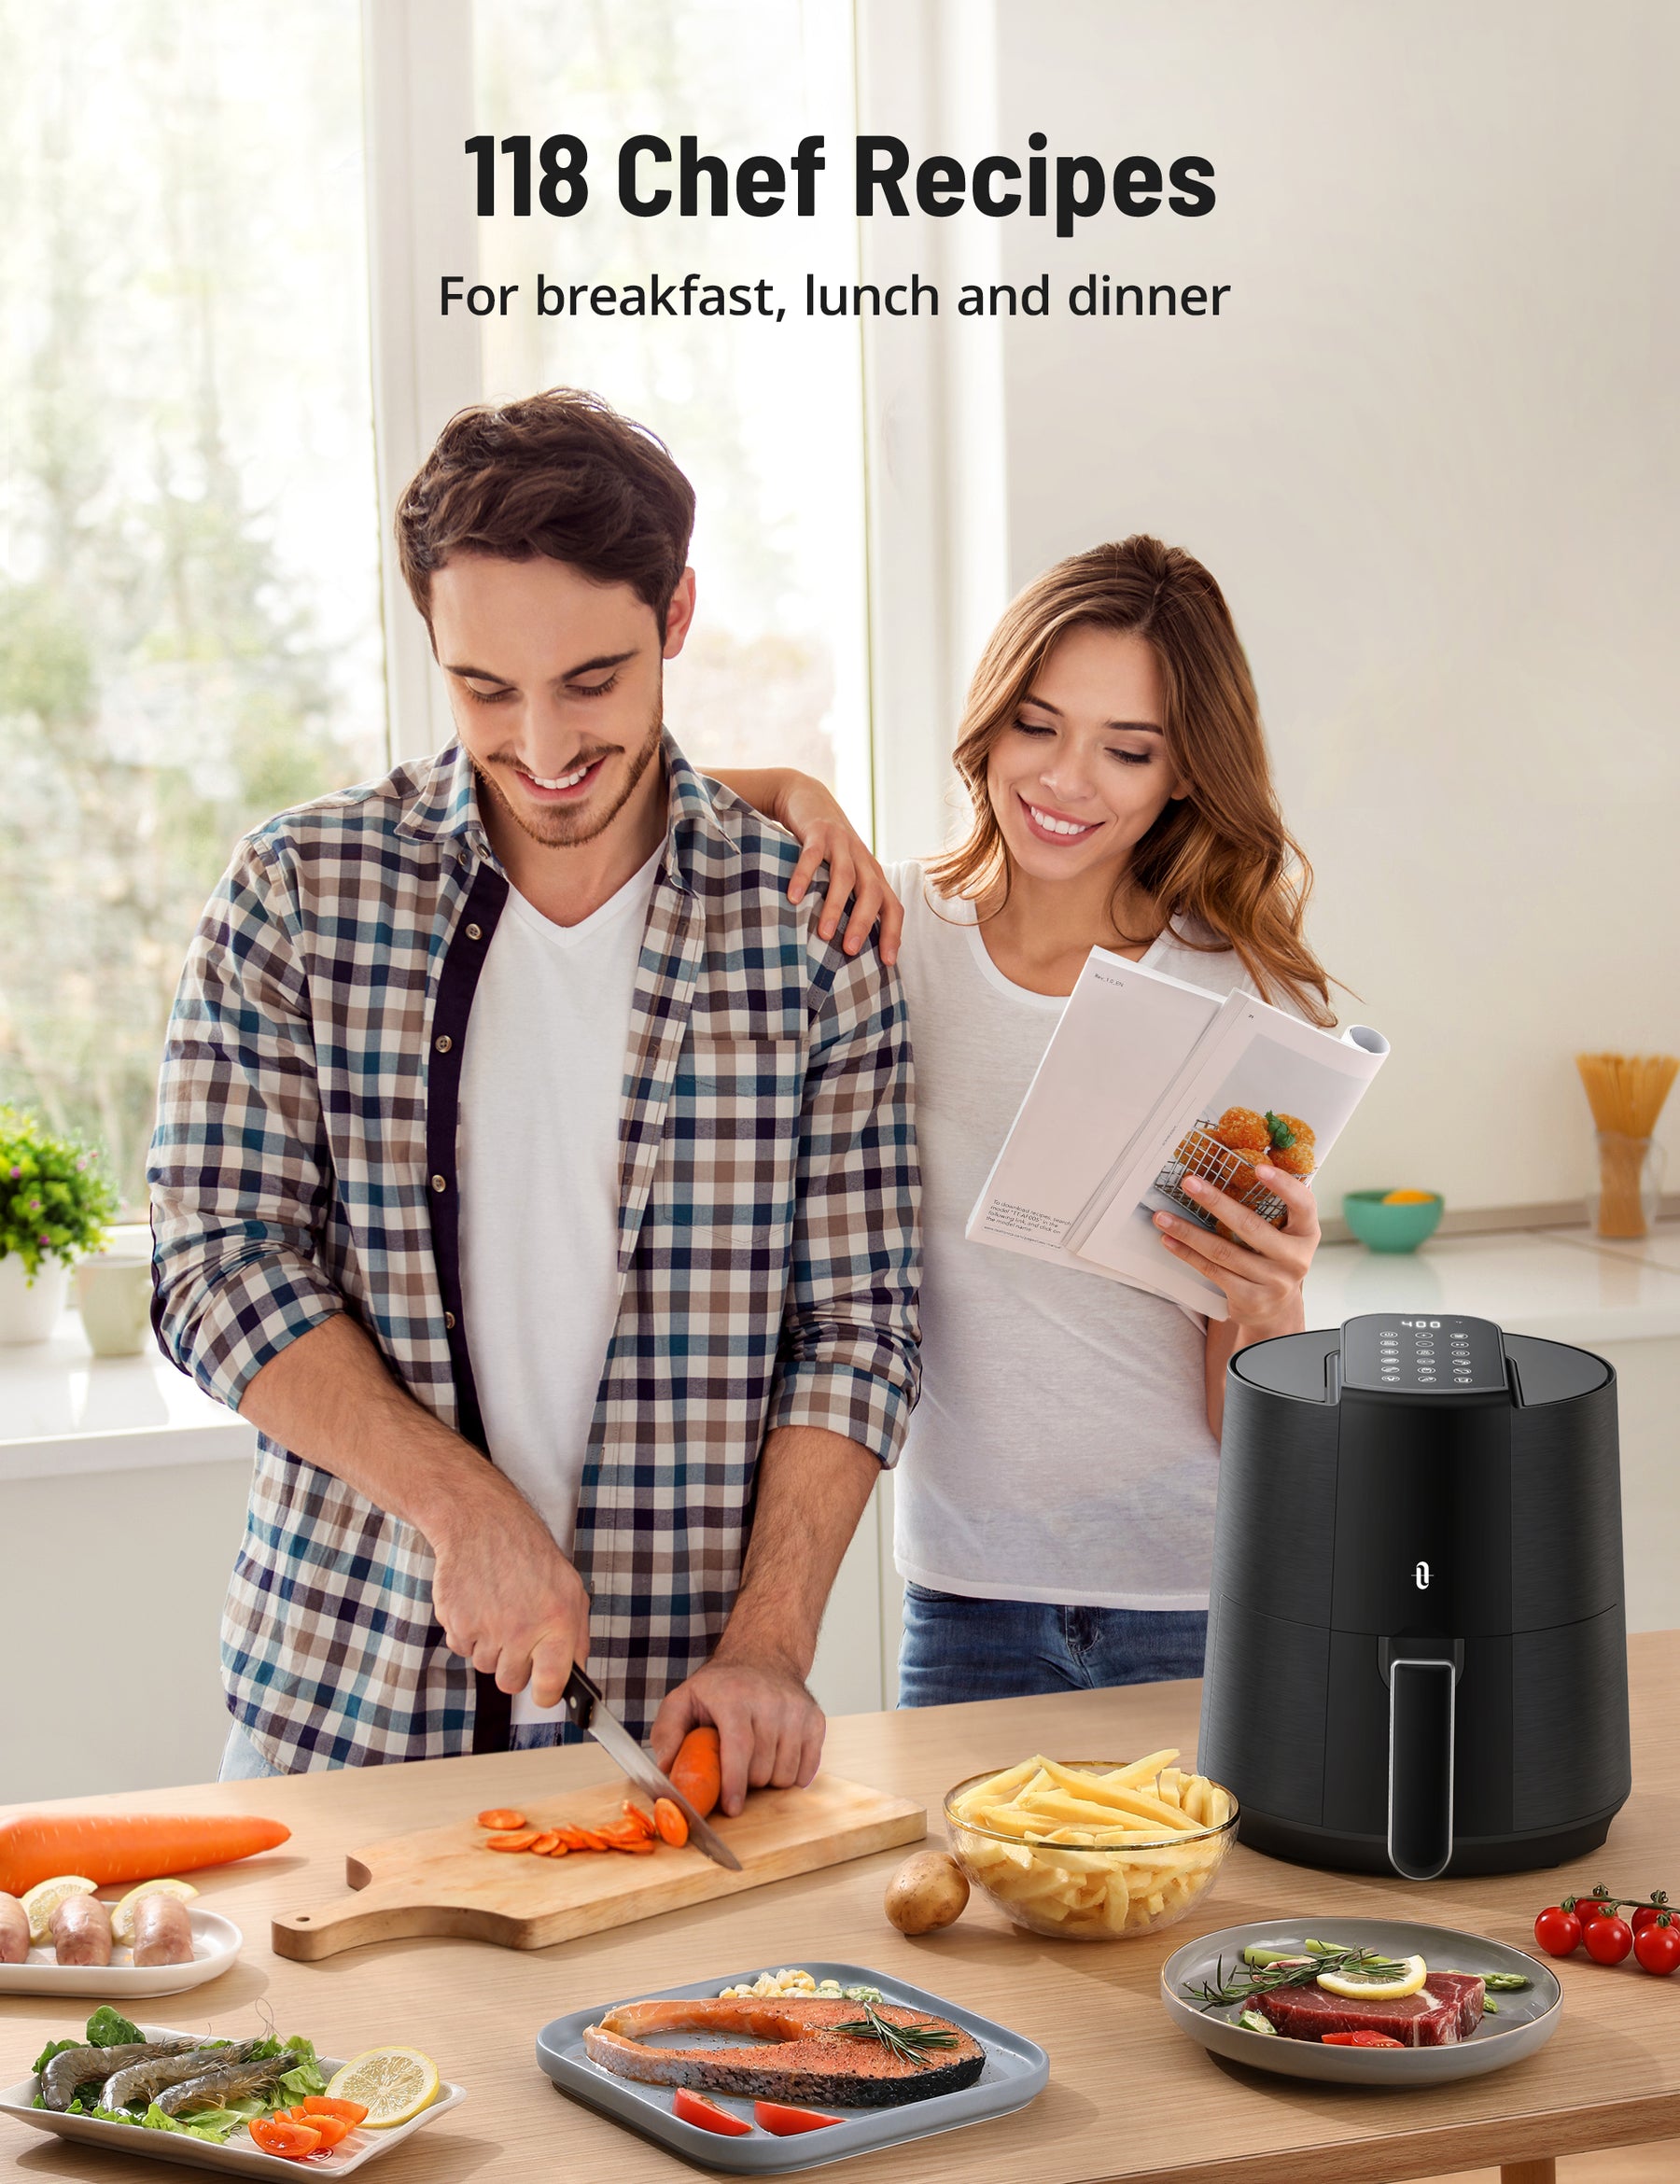 TaoTronics Air Fryer AF005, 4-Quart Oil-less Cooker, Free Cooker with Touch Screen, Detachable Basket, Guided Cooking